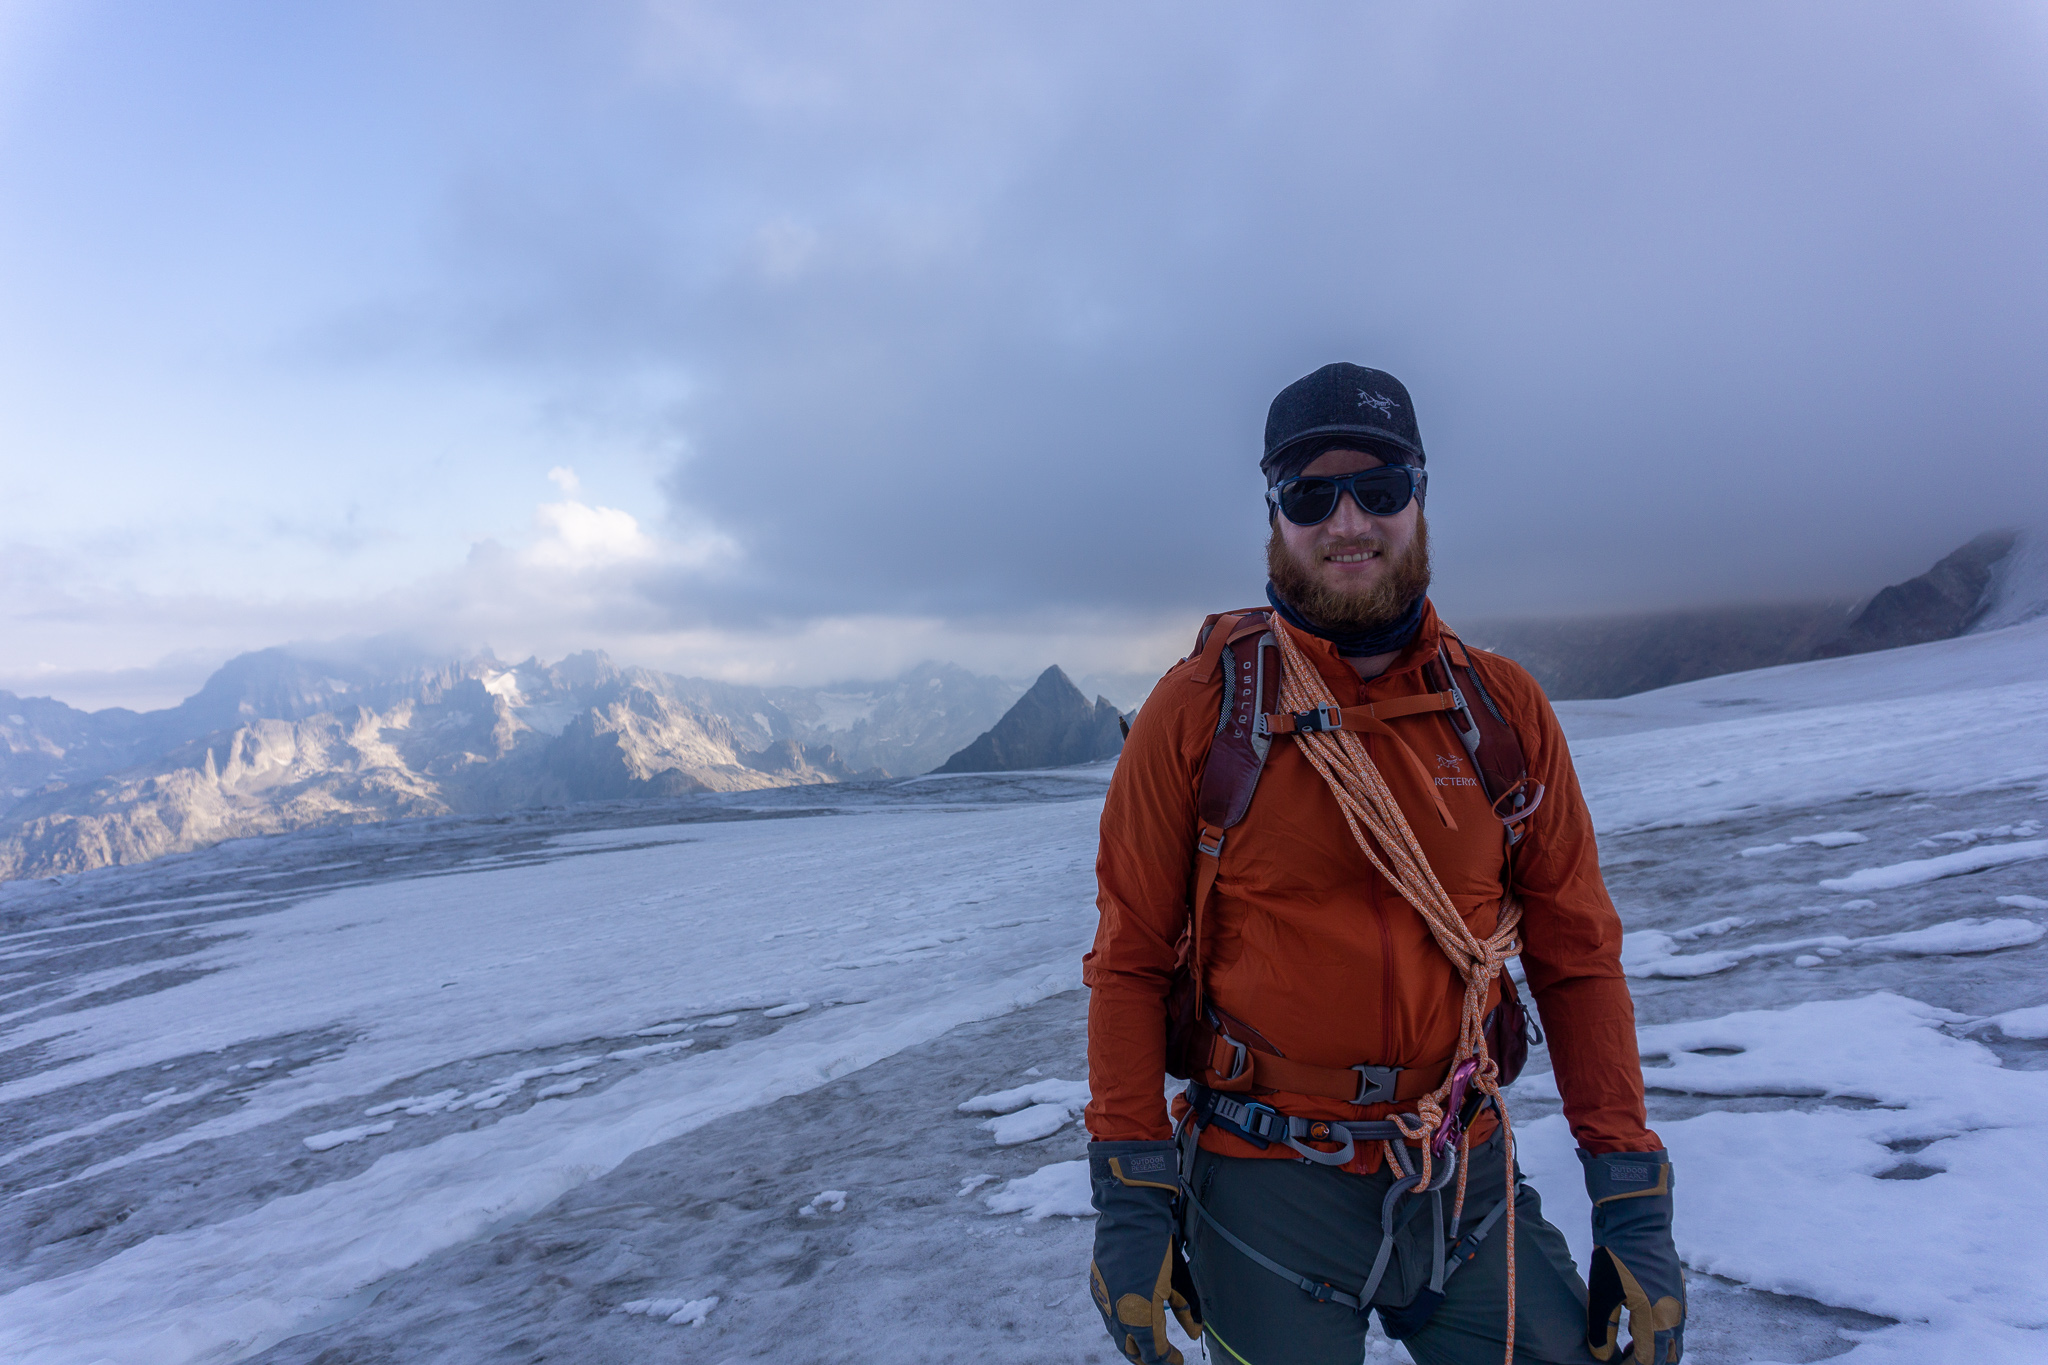 Nevin on the Steingletscher. © 2020, Justine Le Cam.